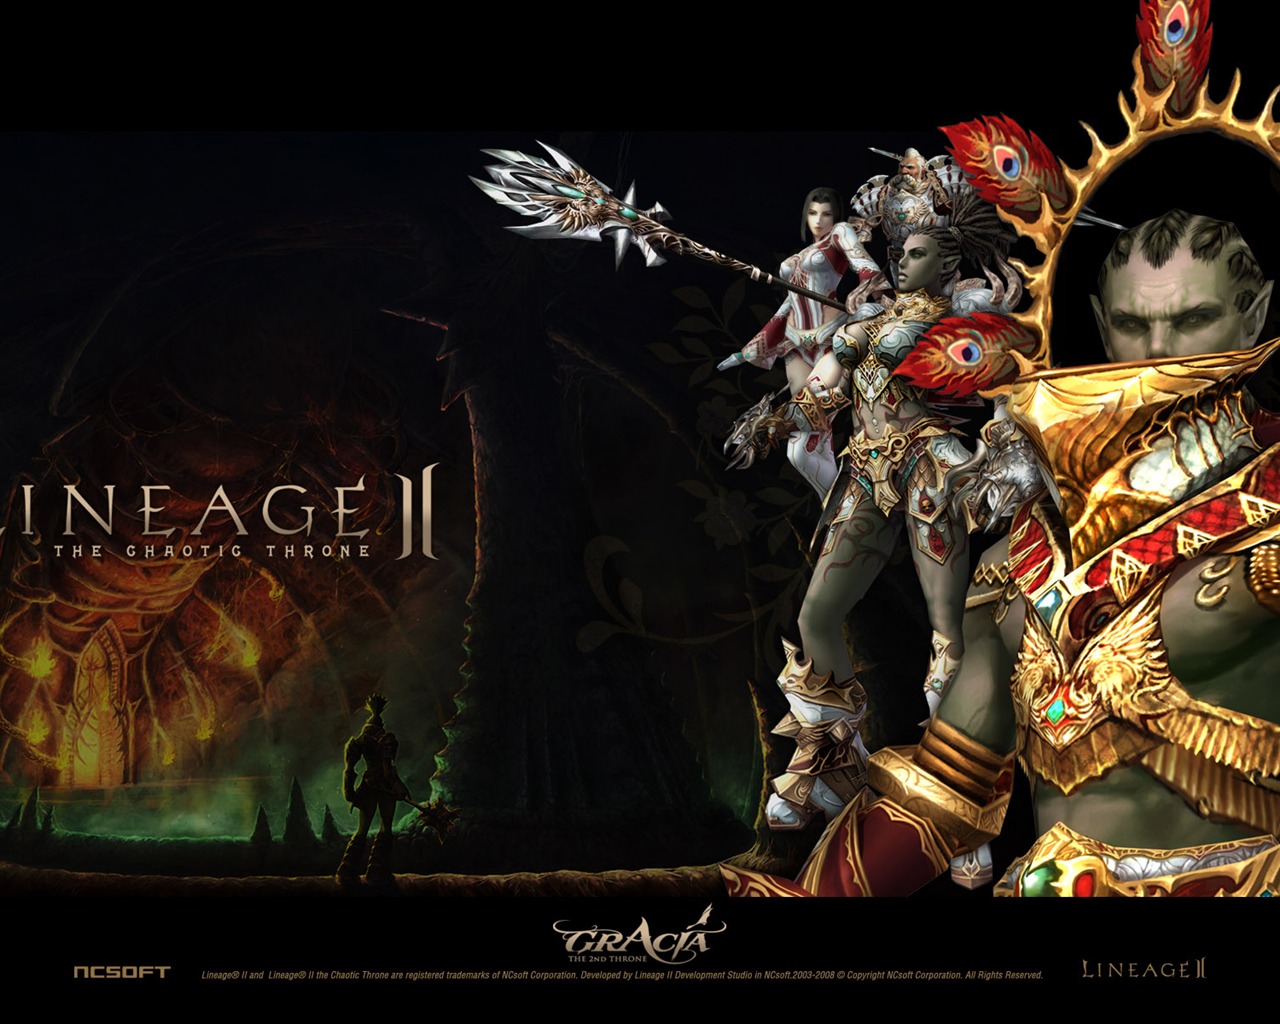 LINEAGE Ⅱ modeling HD gaming wallpapers #2 - 1280x1024